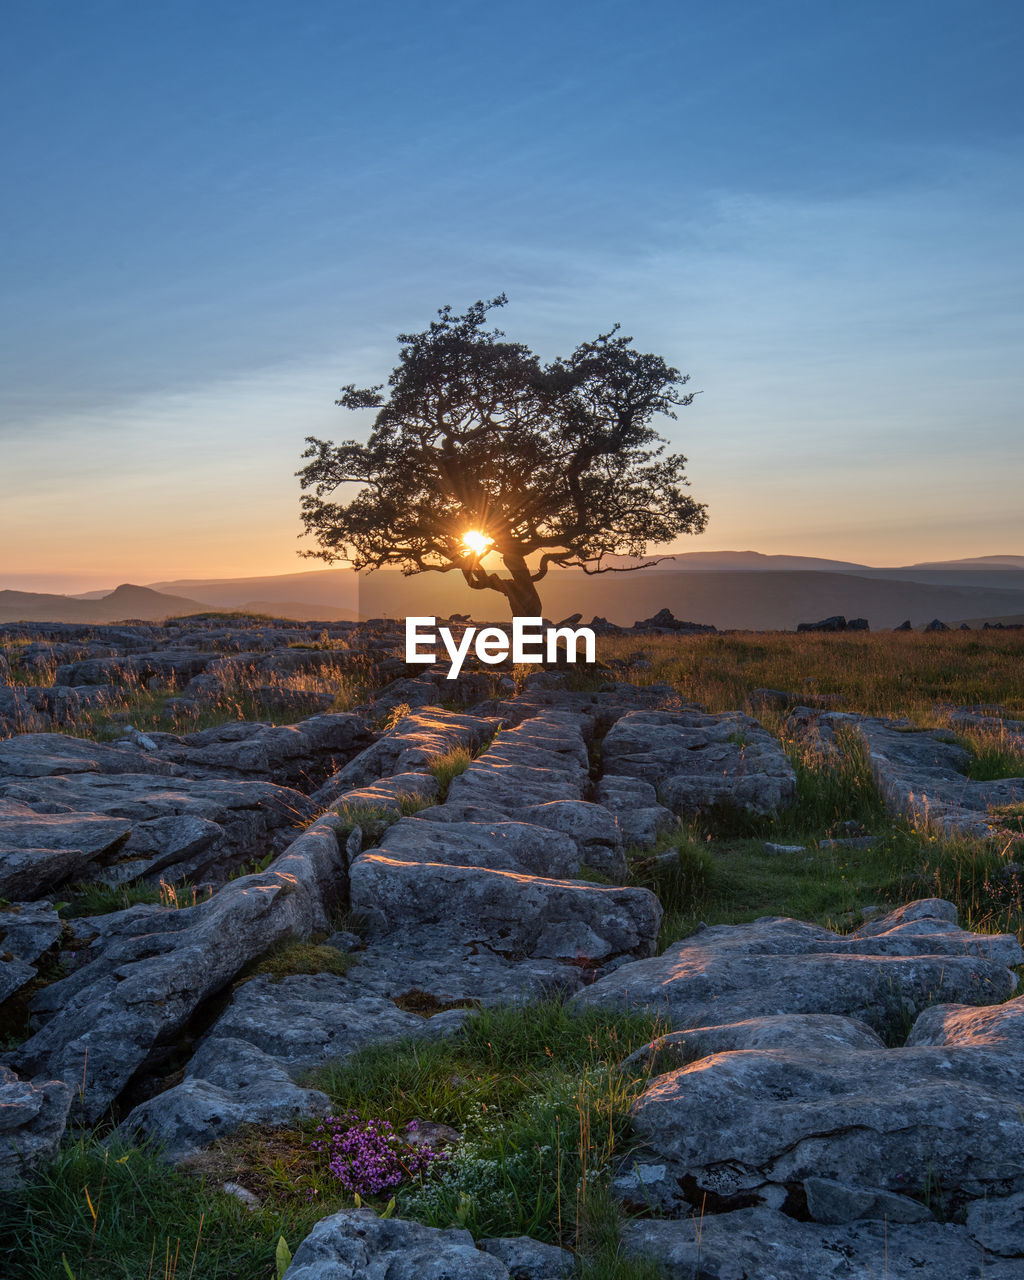 A lone weathered tree in amongst the limestone pavement of the yorkshire dales national park